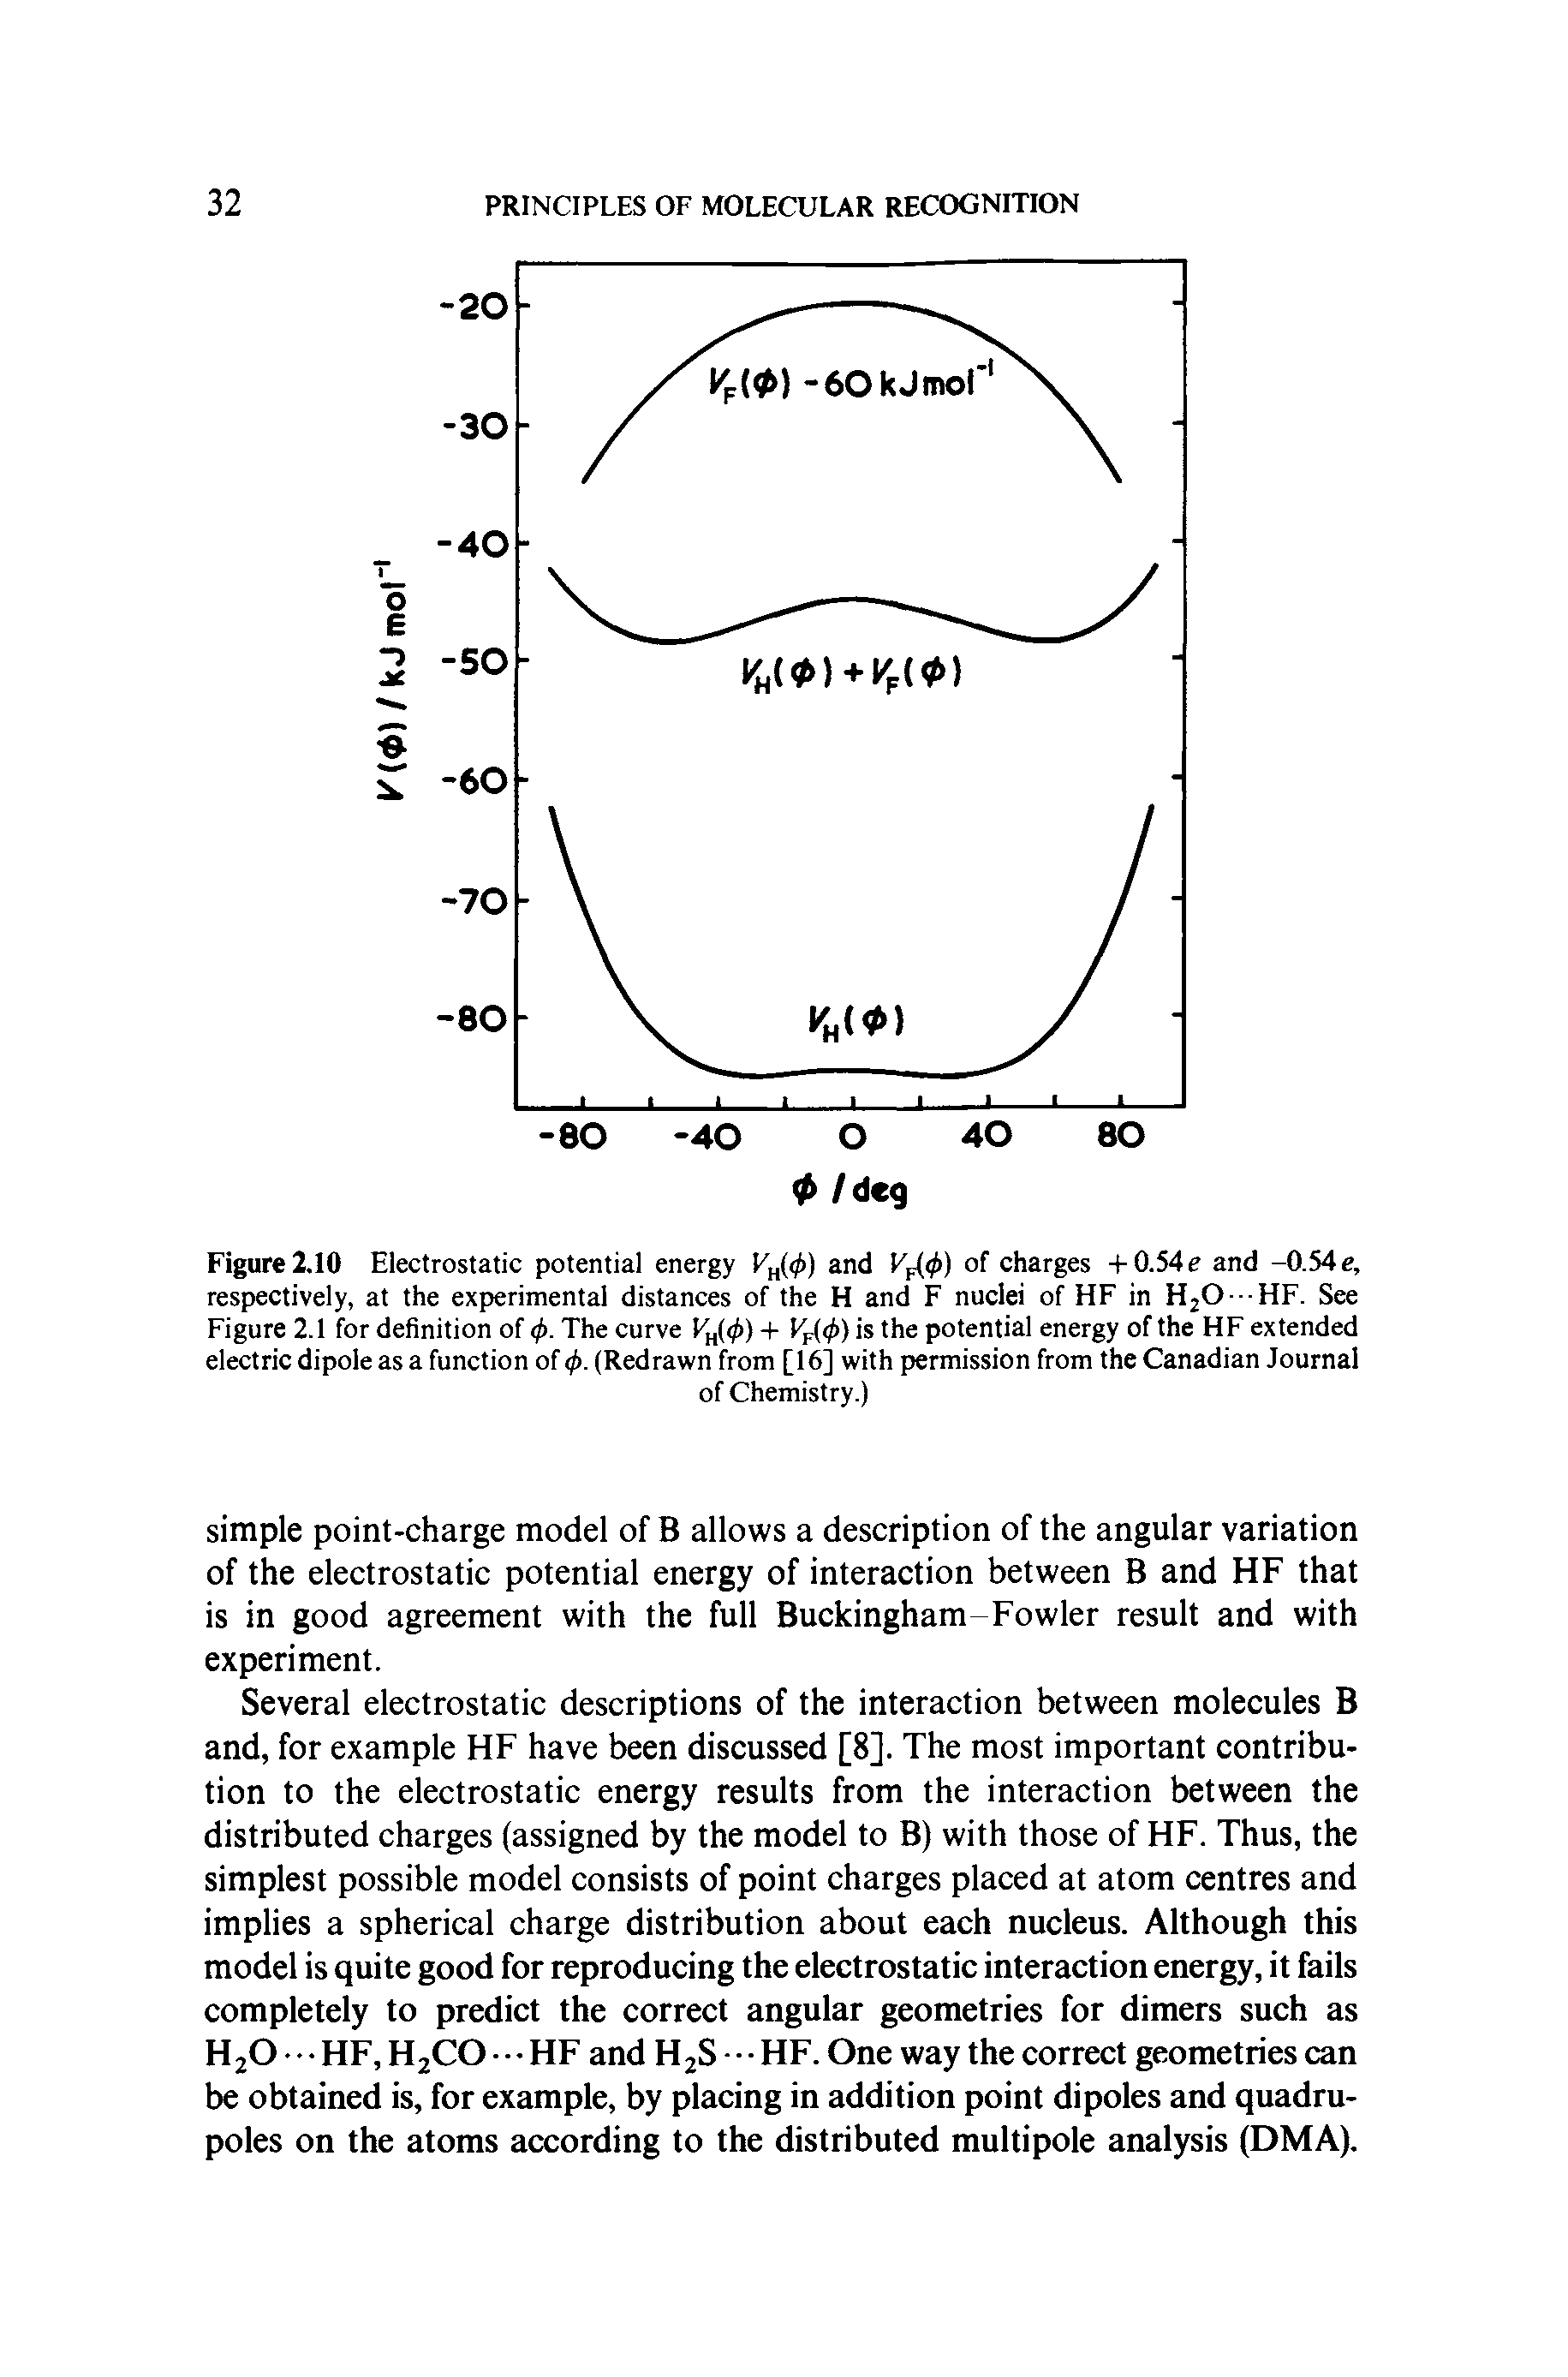 Figure 2.10 Electrostatic potential energy Fn(( ) and Kp(( ) of charges +0.54e and -0.54 e, respectively, at the experimental distances of the H and F nuclei of HF in H20 - HF. See Figure 2.1 for definition of (j>. The curve Vh(4>) + y 4>) is the potential energy of the HF extended electric dipole as a function of (j>. (Redrawn from [16] with permission from the Canadian Journal...